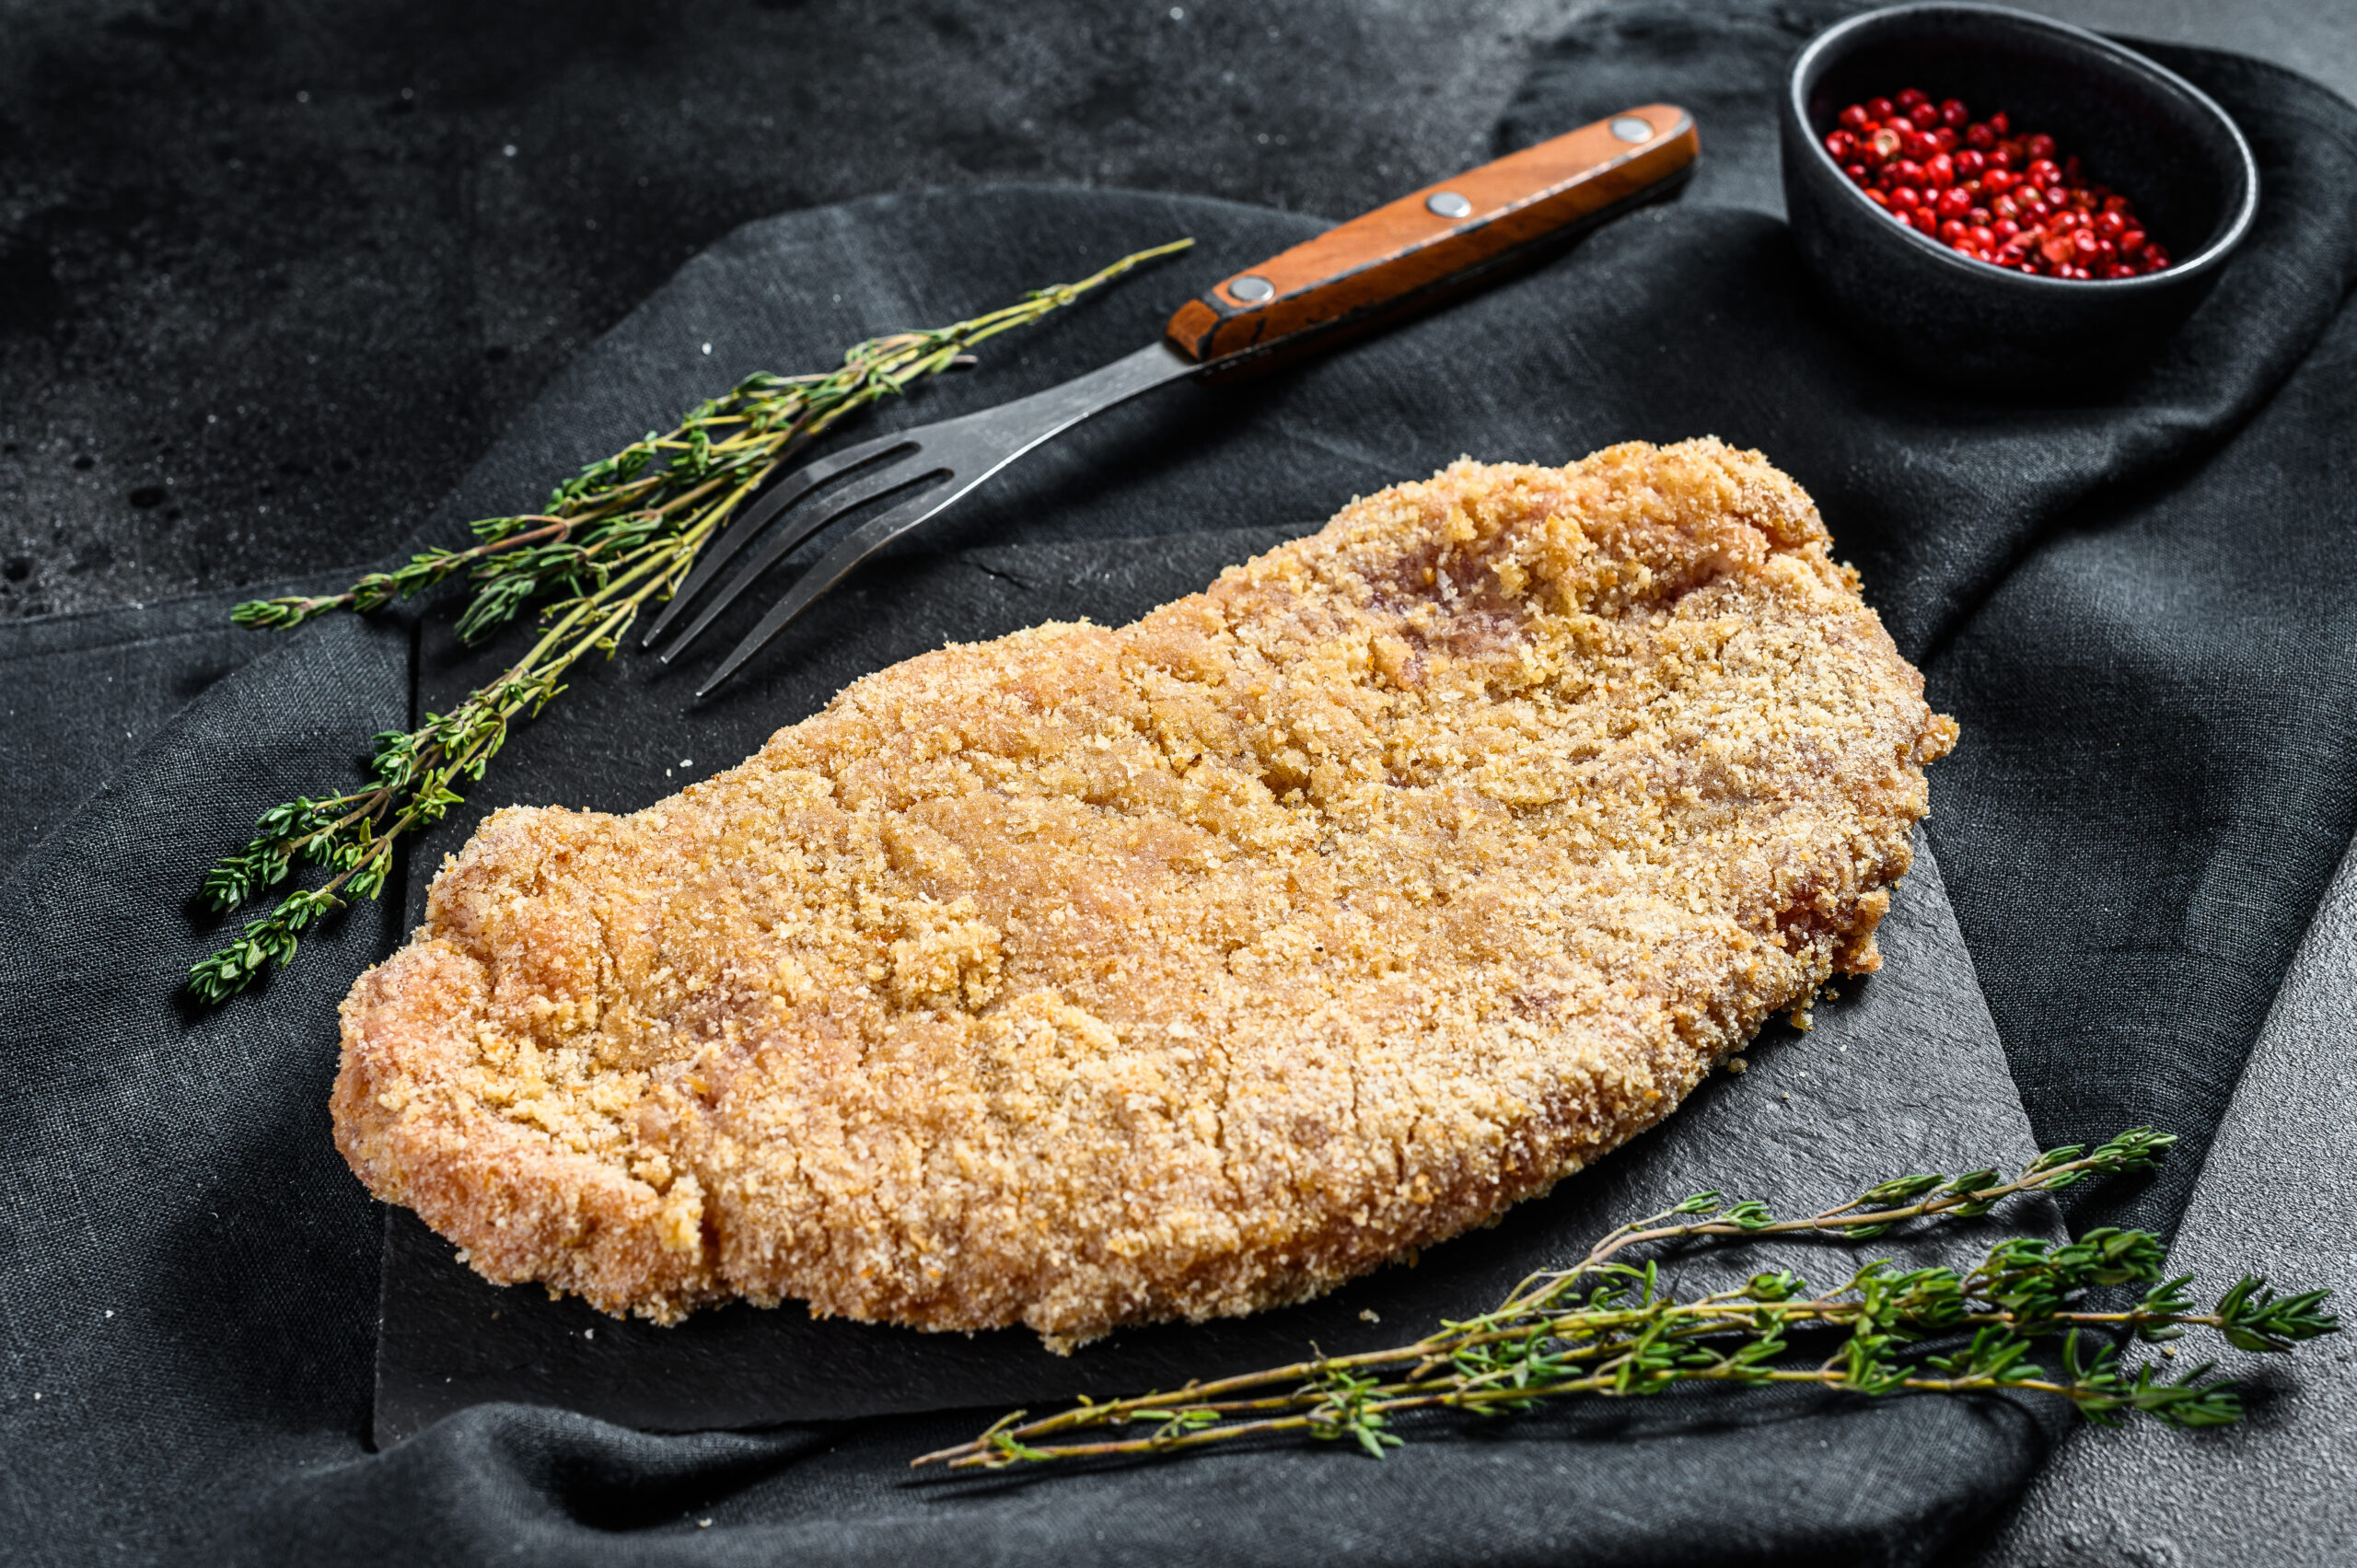 How To Cook Milanesa Steak Without Breading